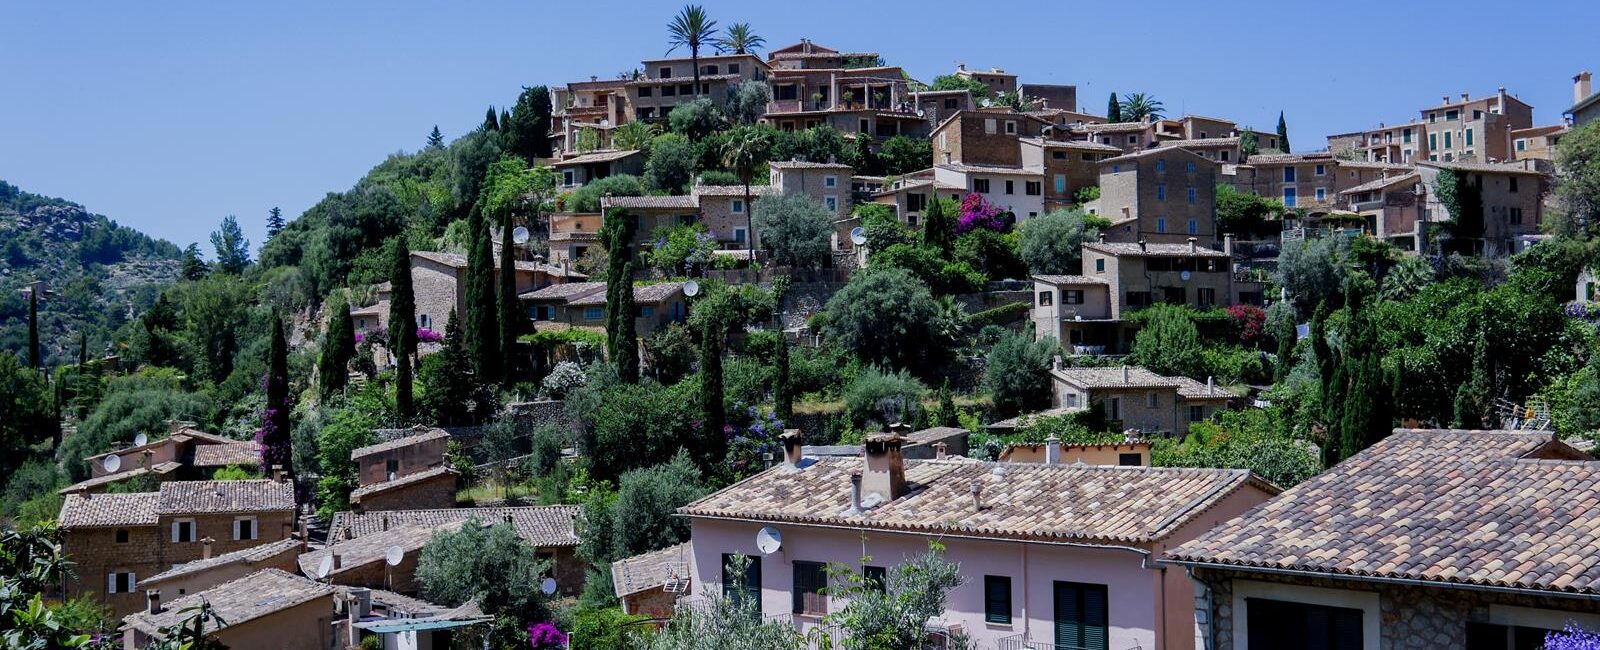 THE MOST BEAUTIFUL TOWNS IN MAJORCA WHICH YOU MUST VISIT – MALLORCA BLOG